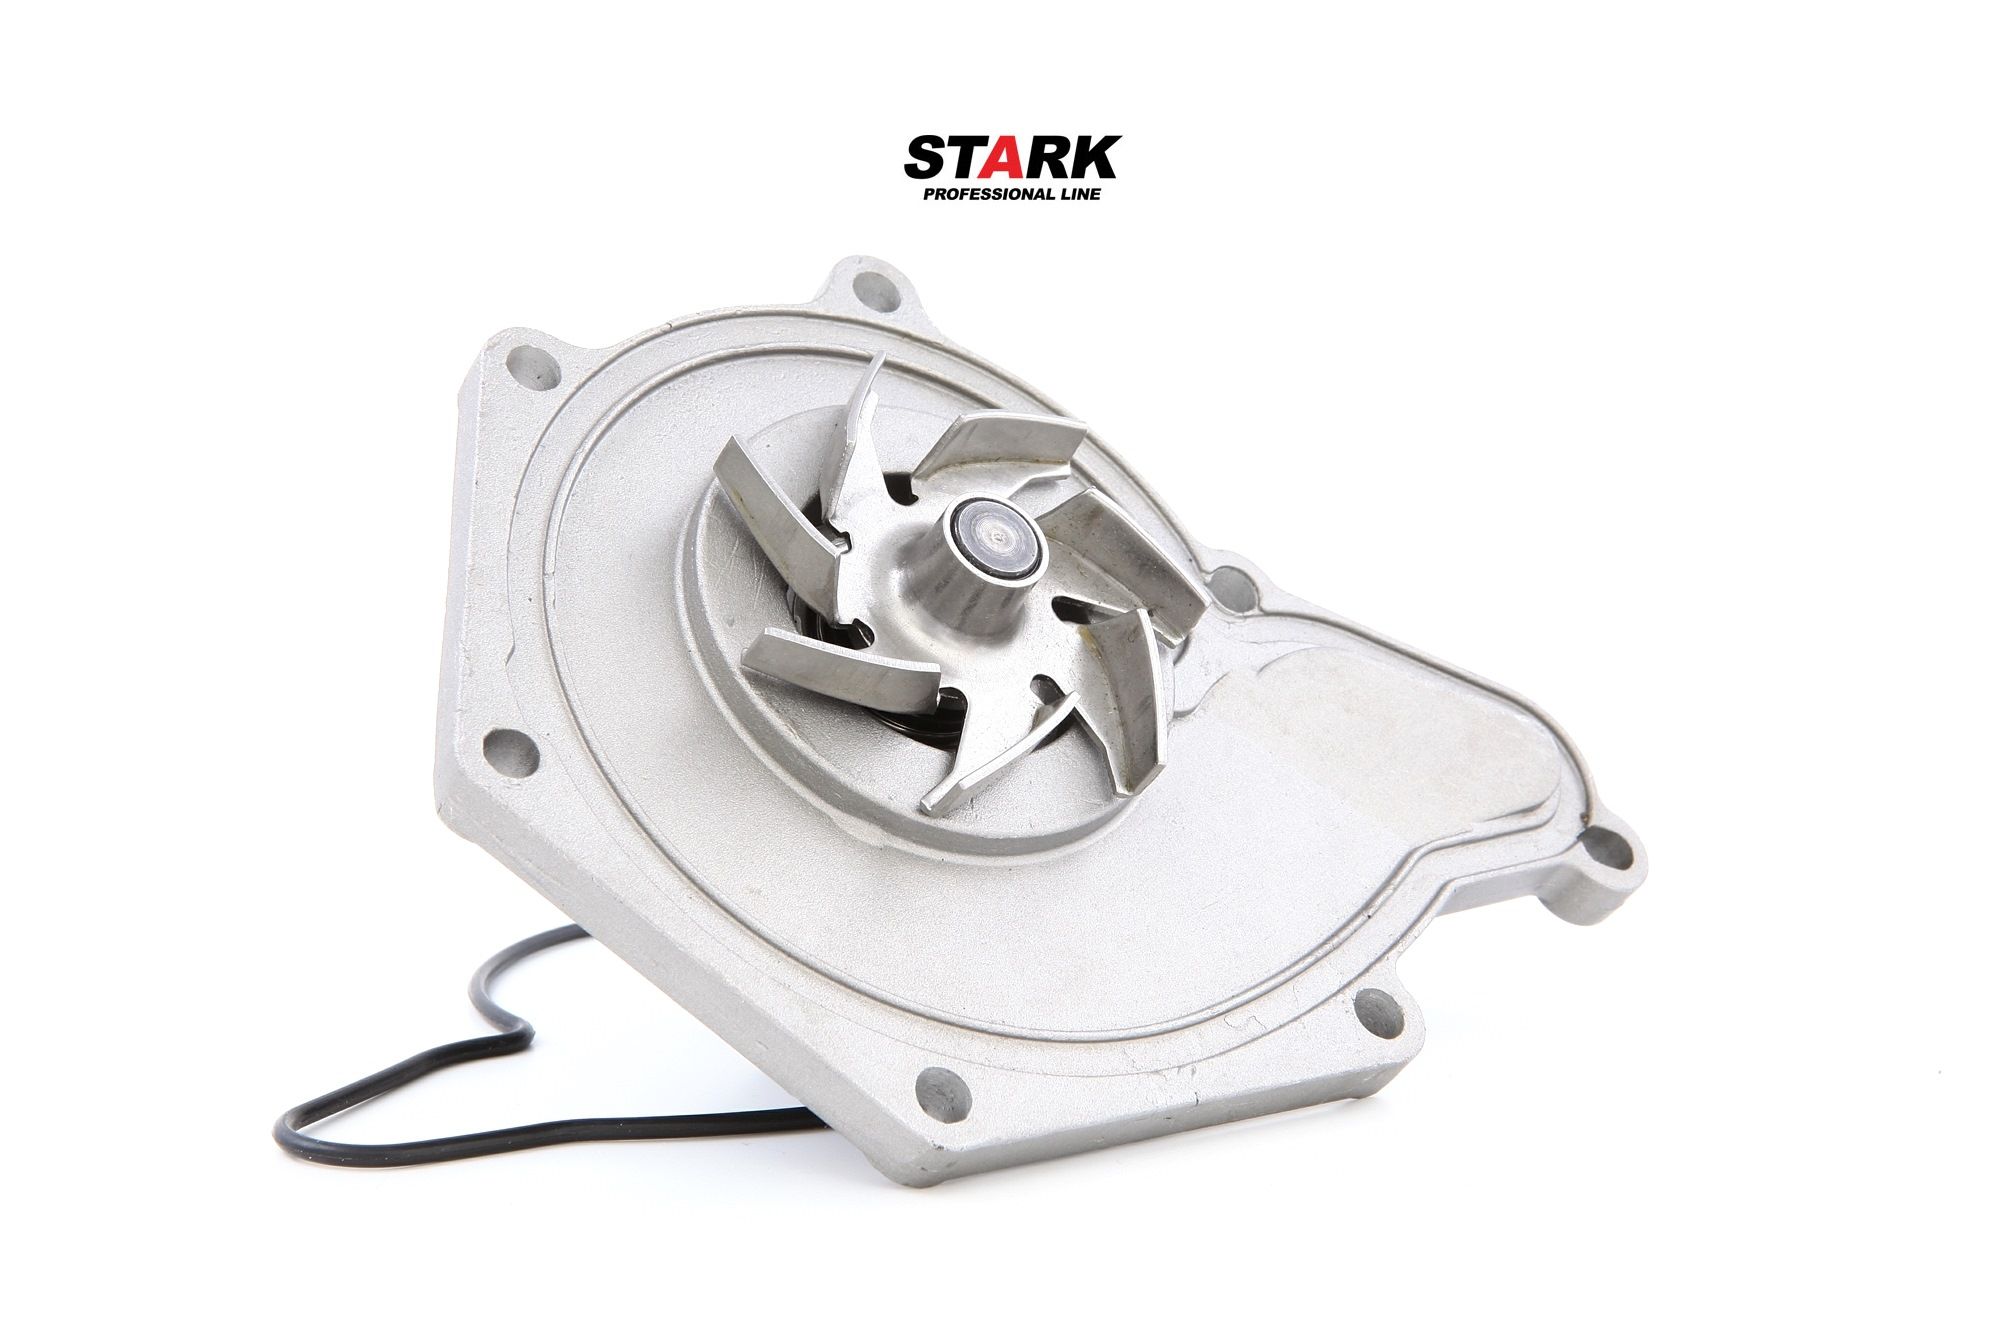 STARK SKWP-0520055 Water pump Cast Aluminium, without belt pulley, with seal, Mechanical, Metal